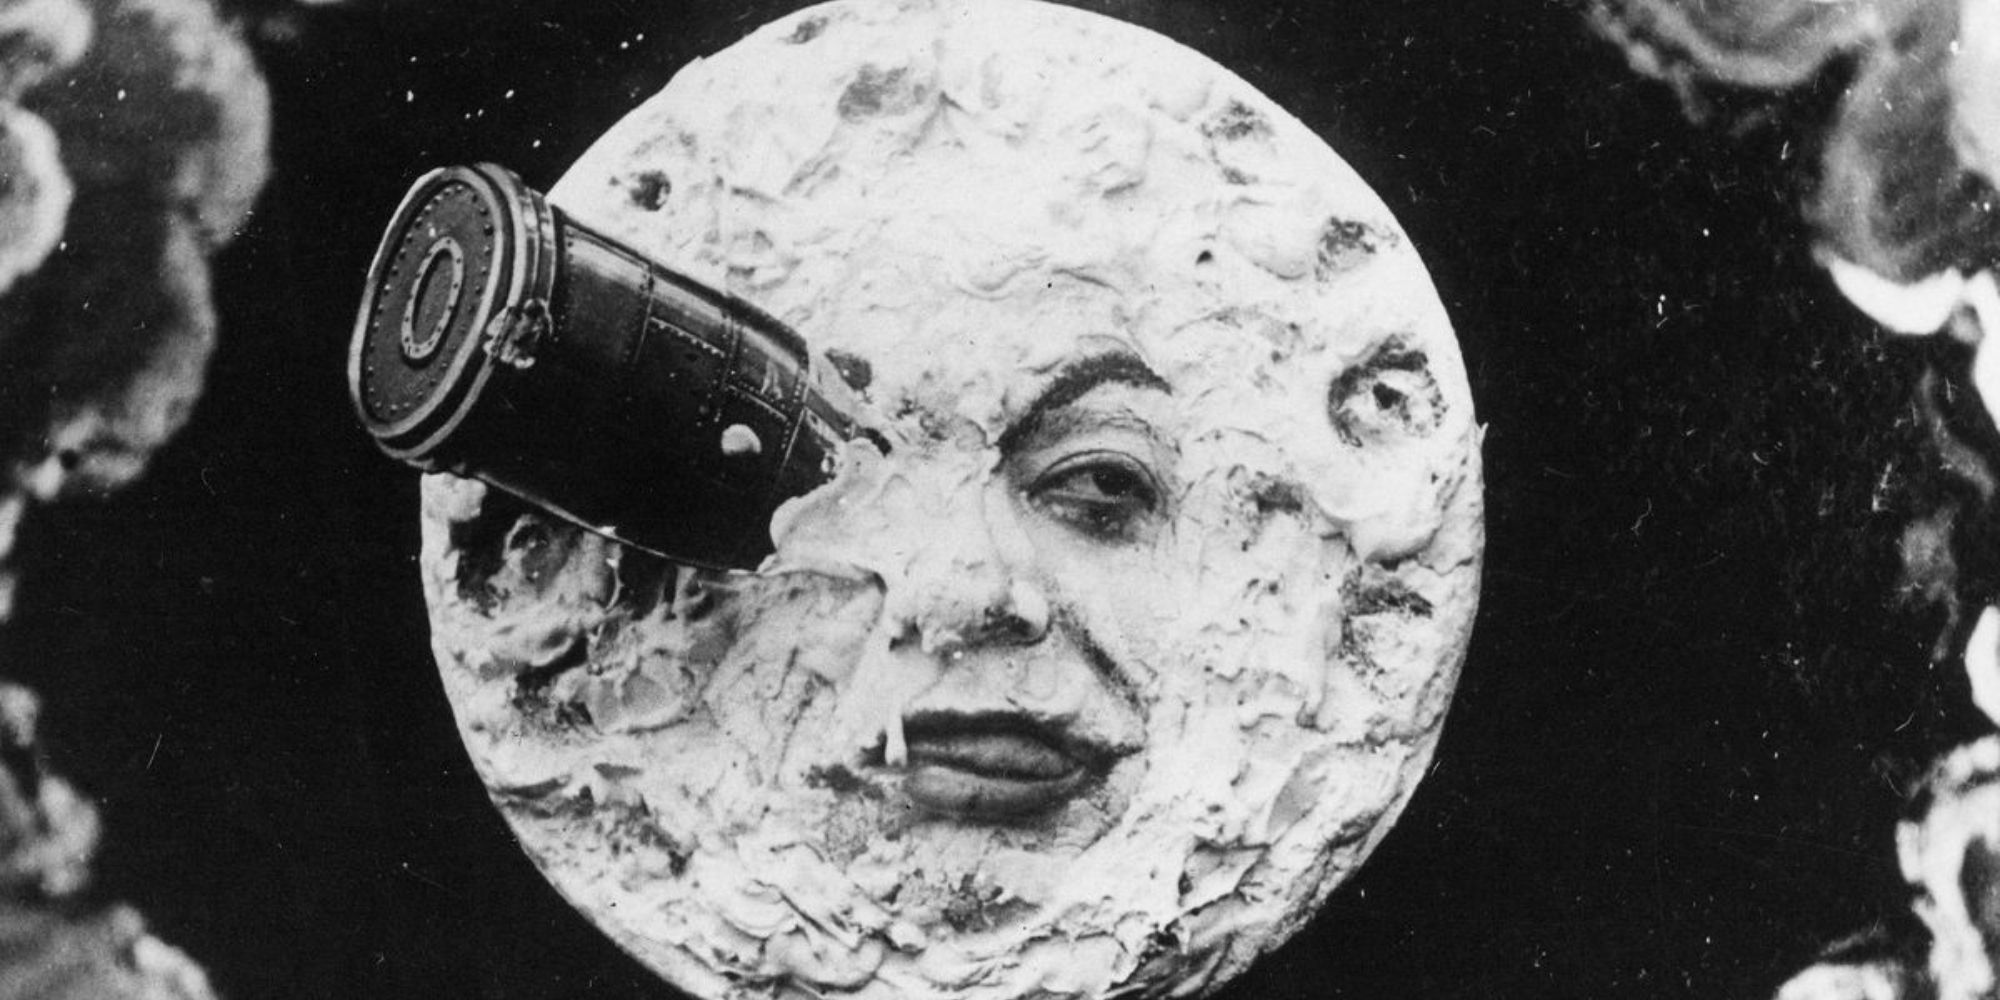 Fireworks will shoot at the moon in the eyes of George Melies' A Trip to the Moon.